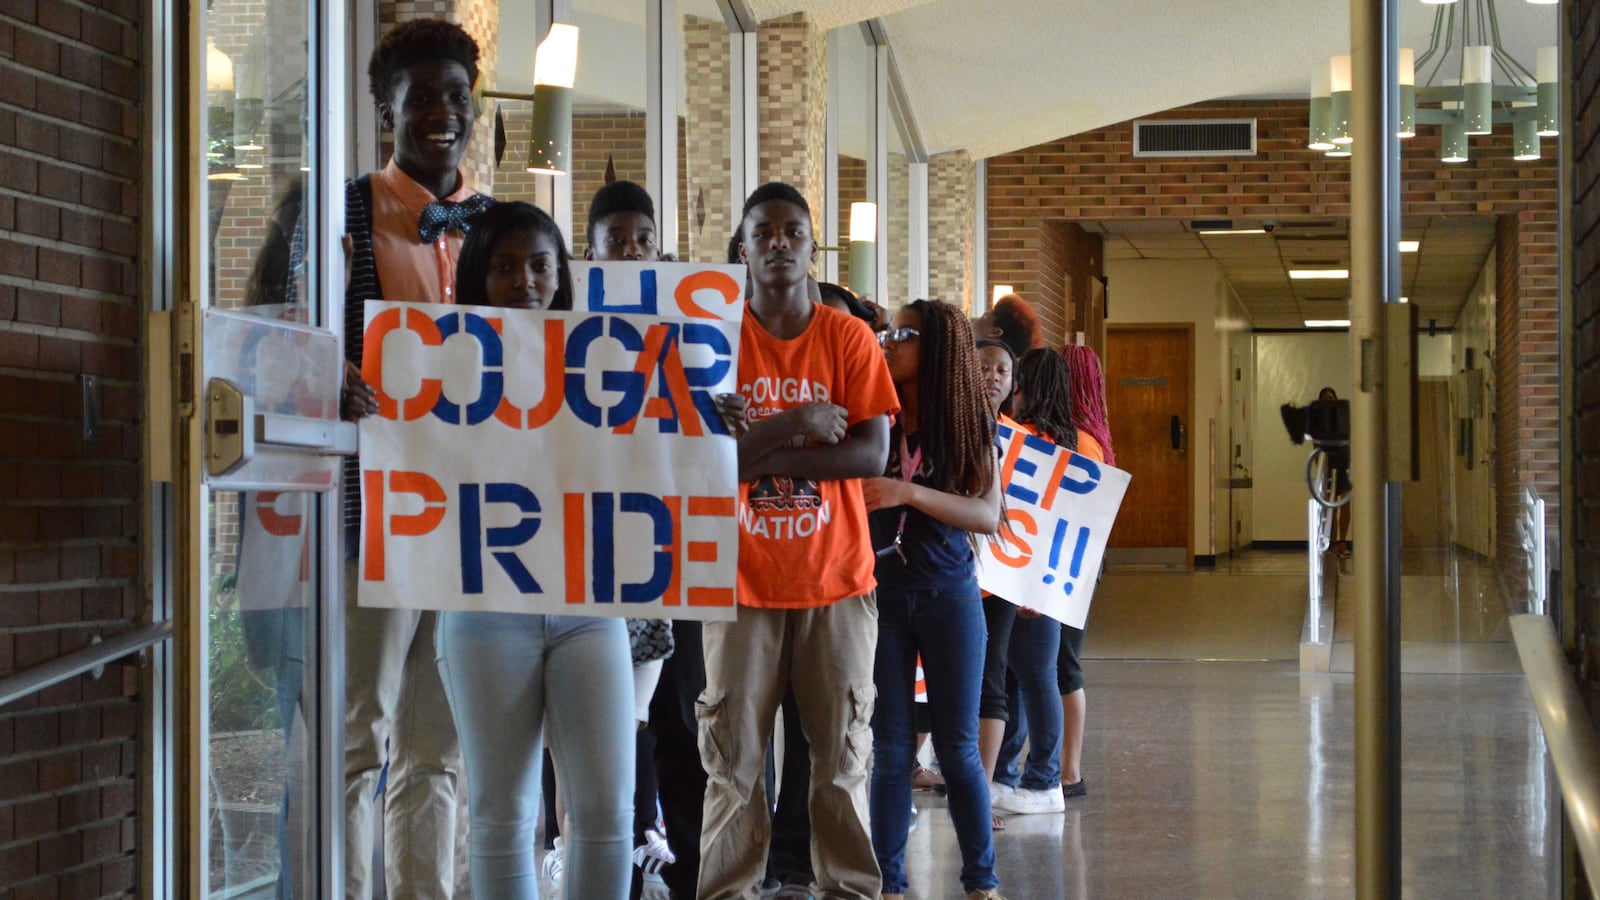 Northside High School students gathered in April to protest the closure of their school.